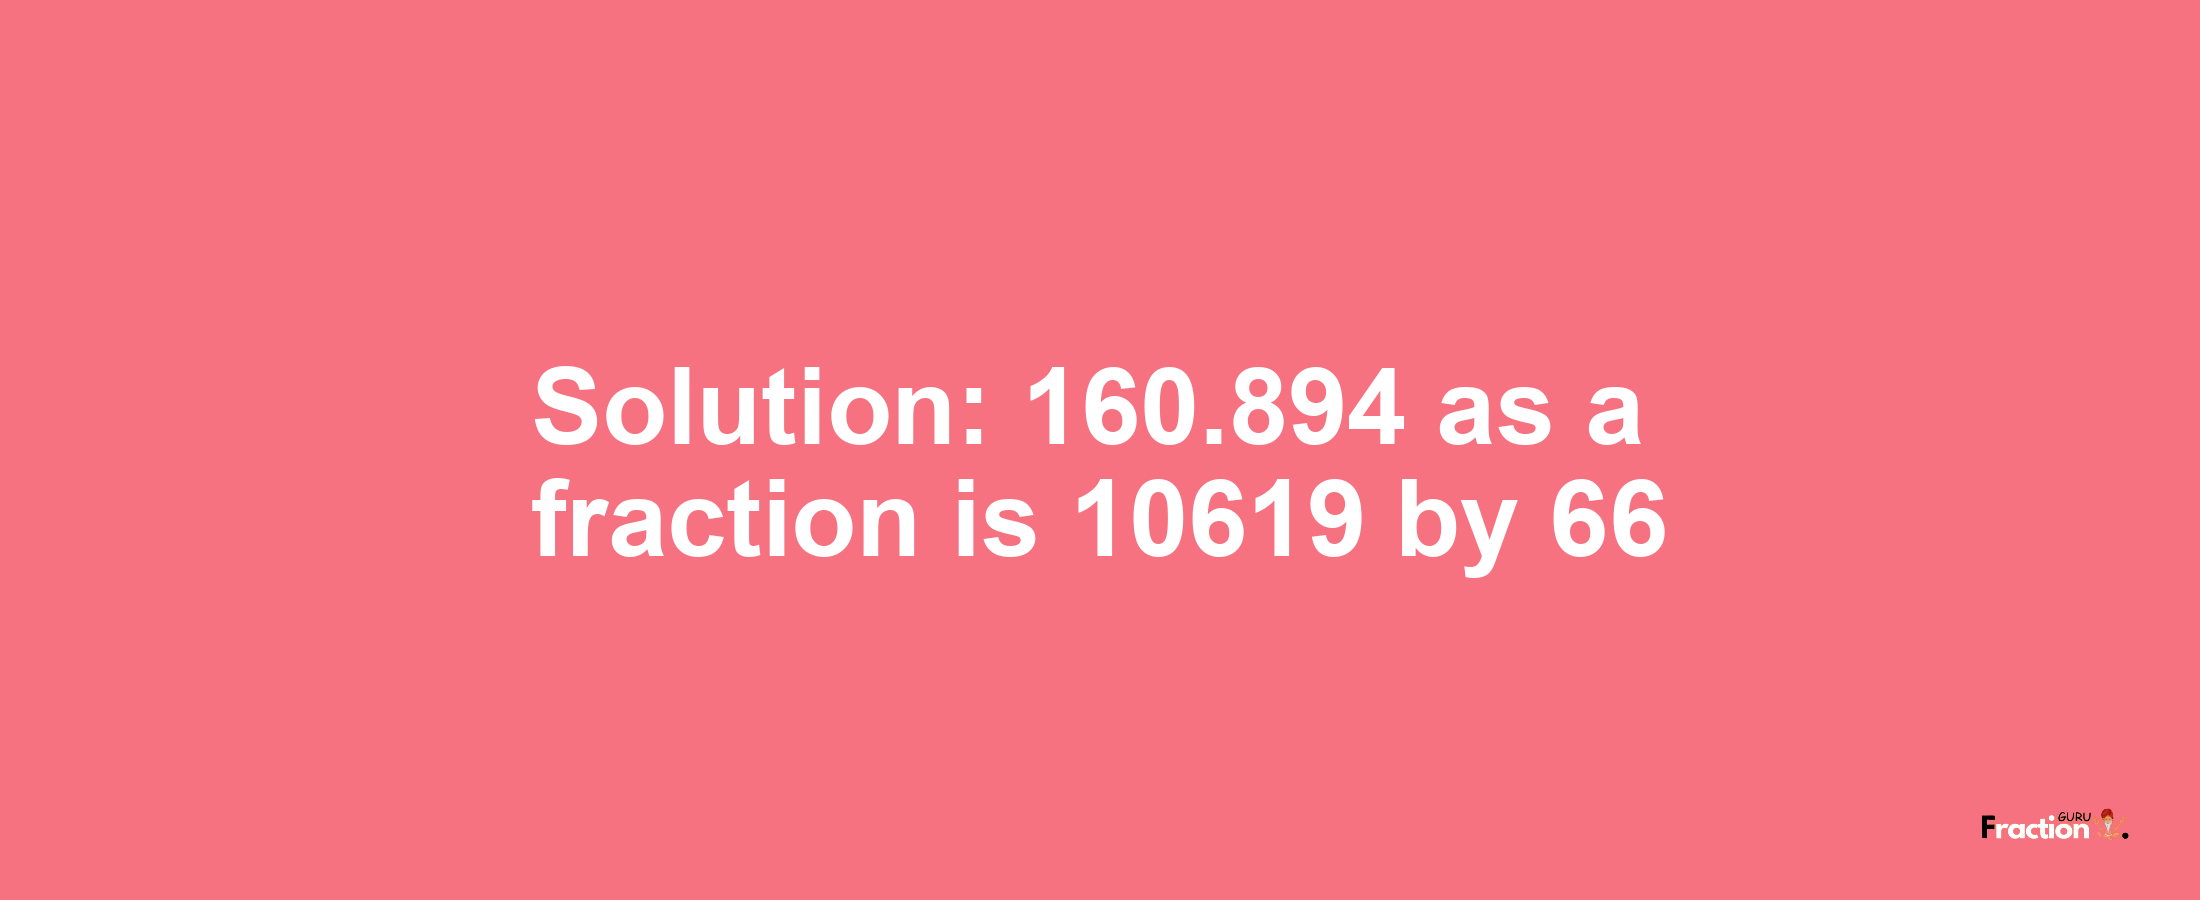 Solution:160.894 as a fraction is 10619/66